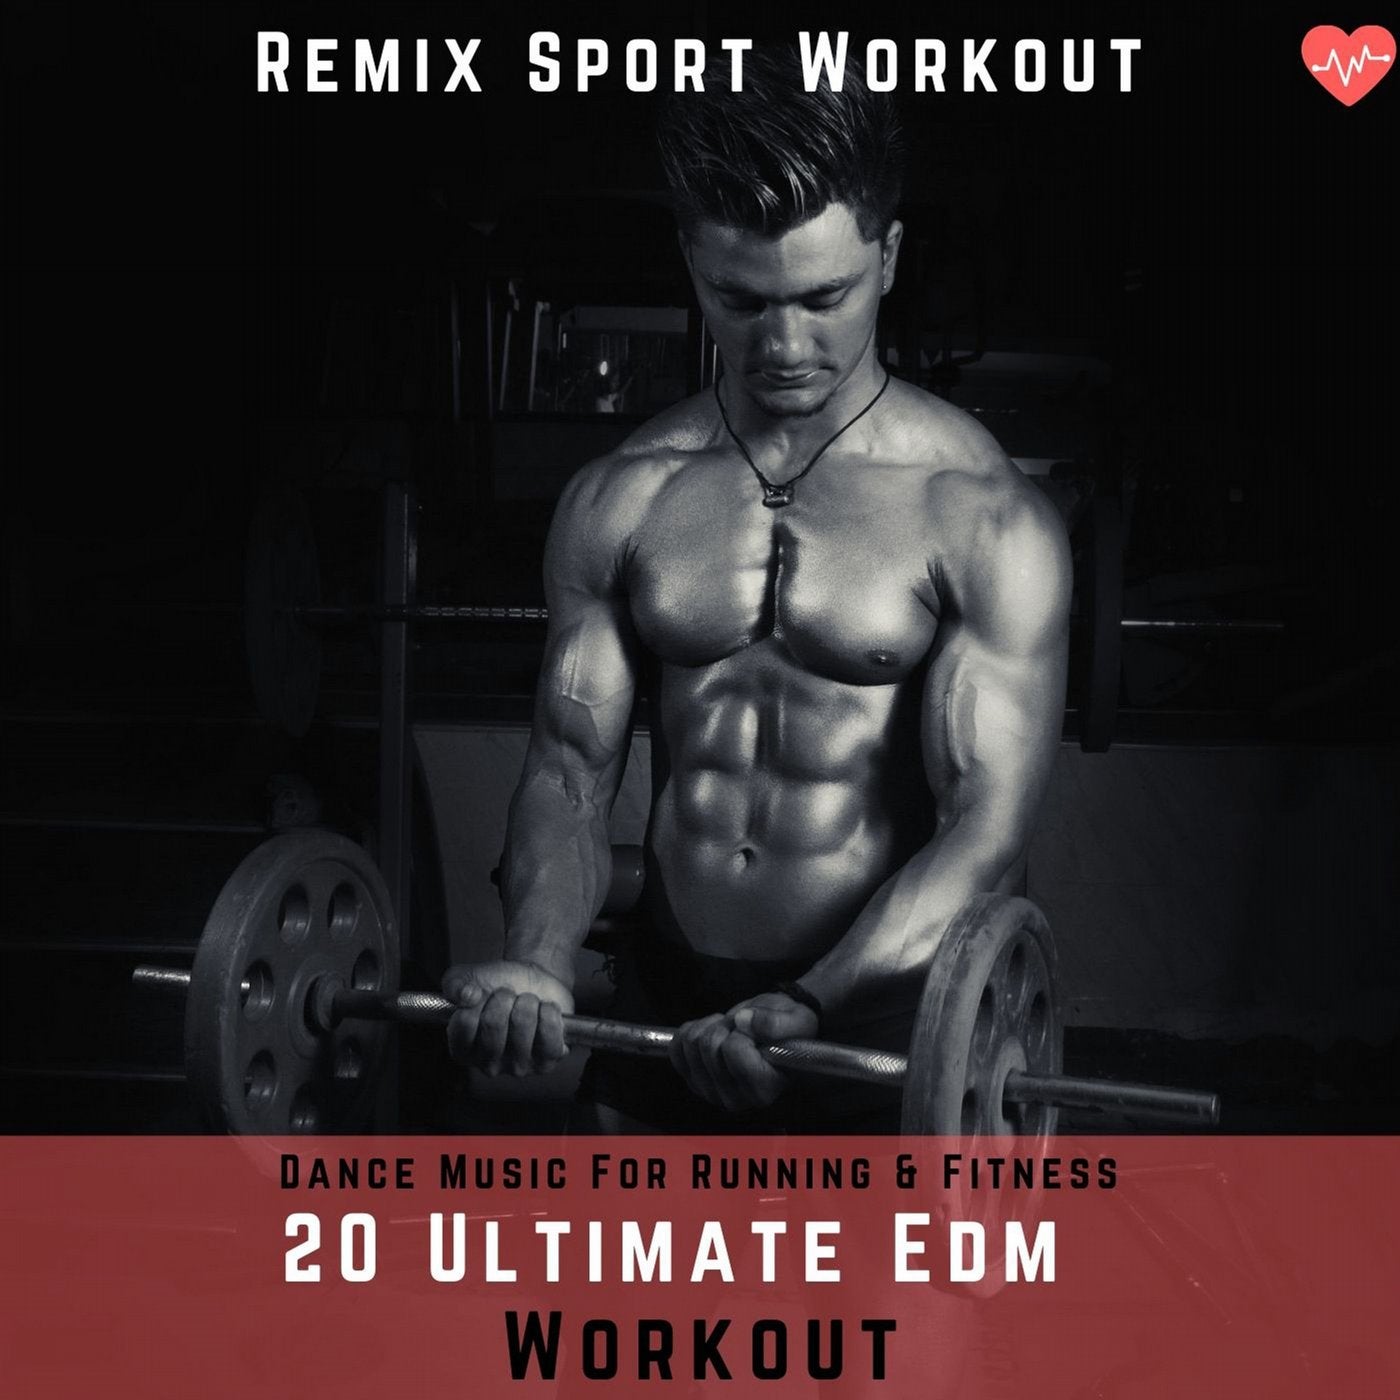 20 Ultimate EDM Workout (Dance Music for Running & Fitness)